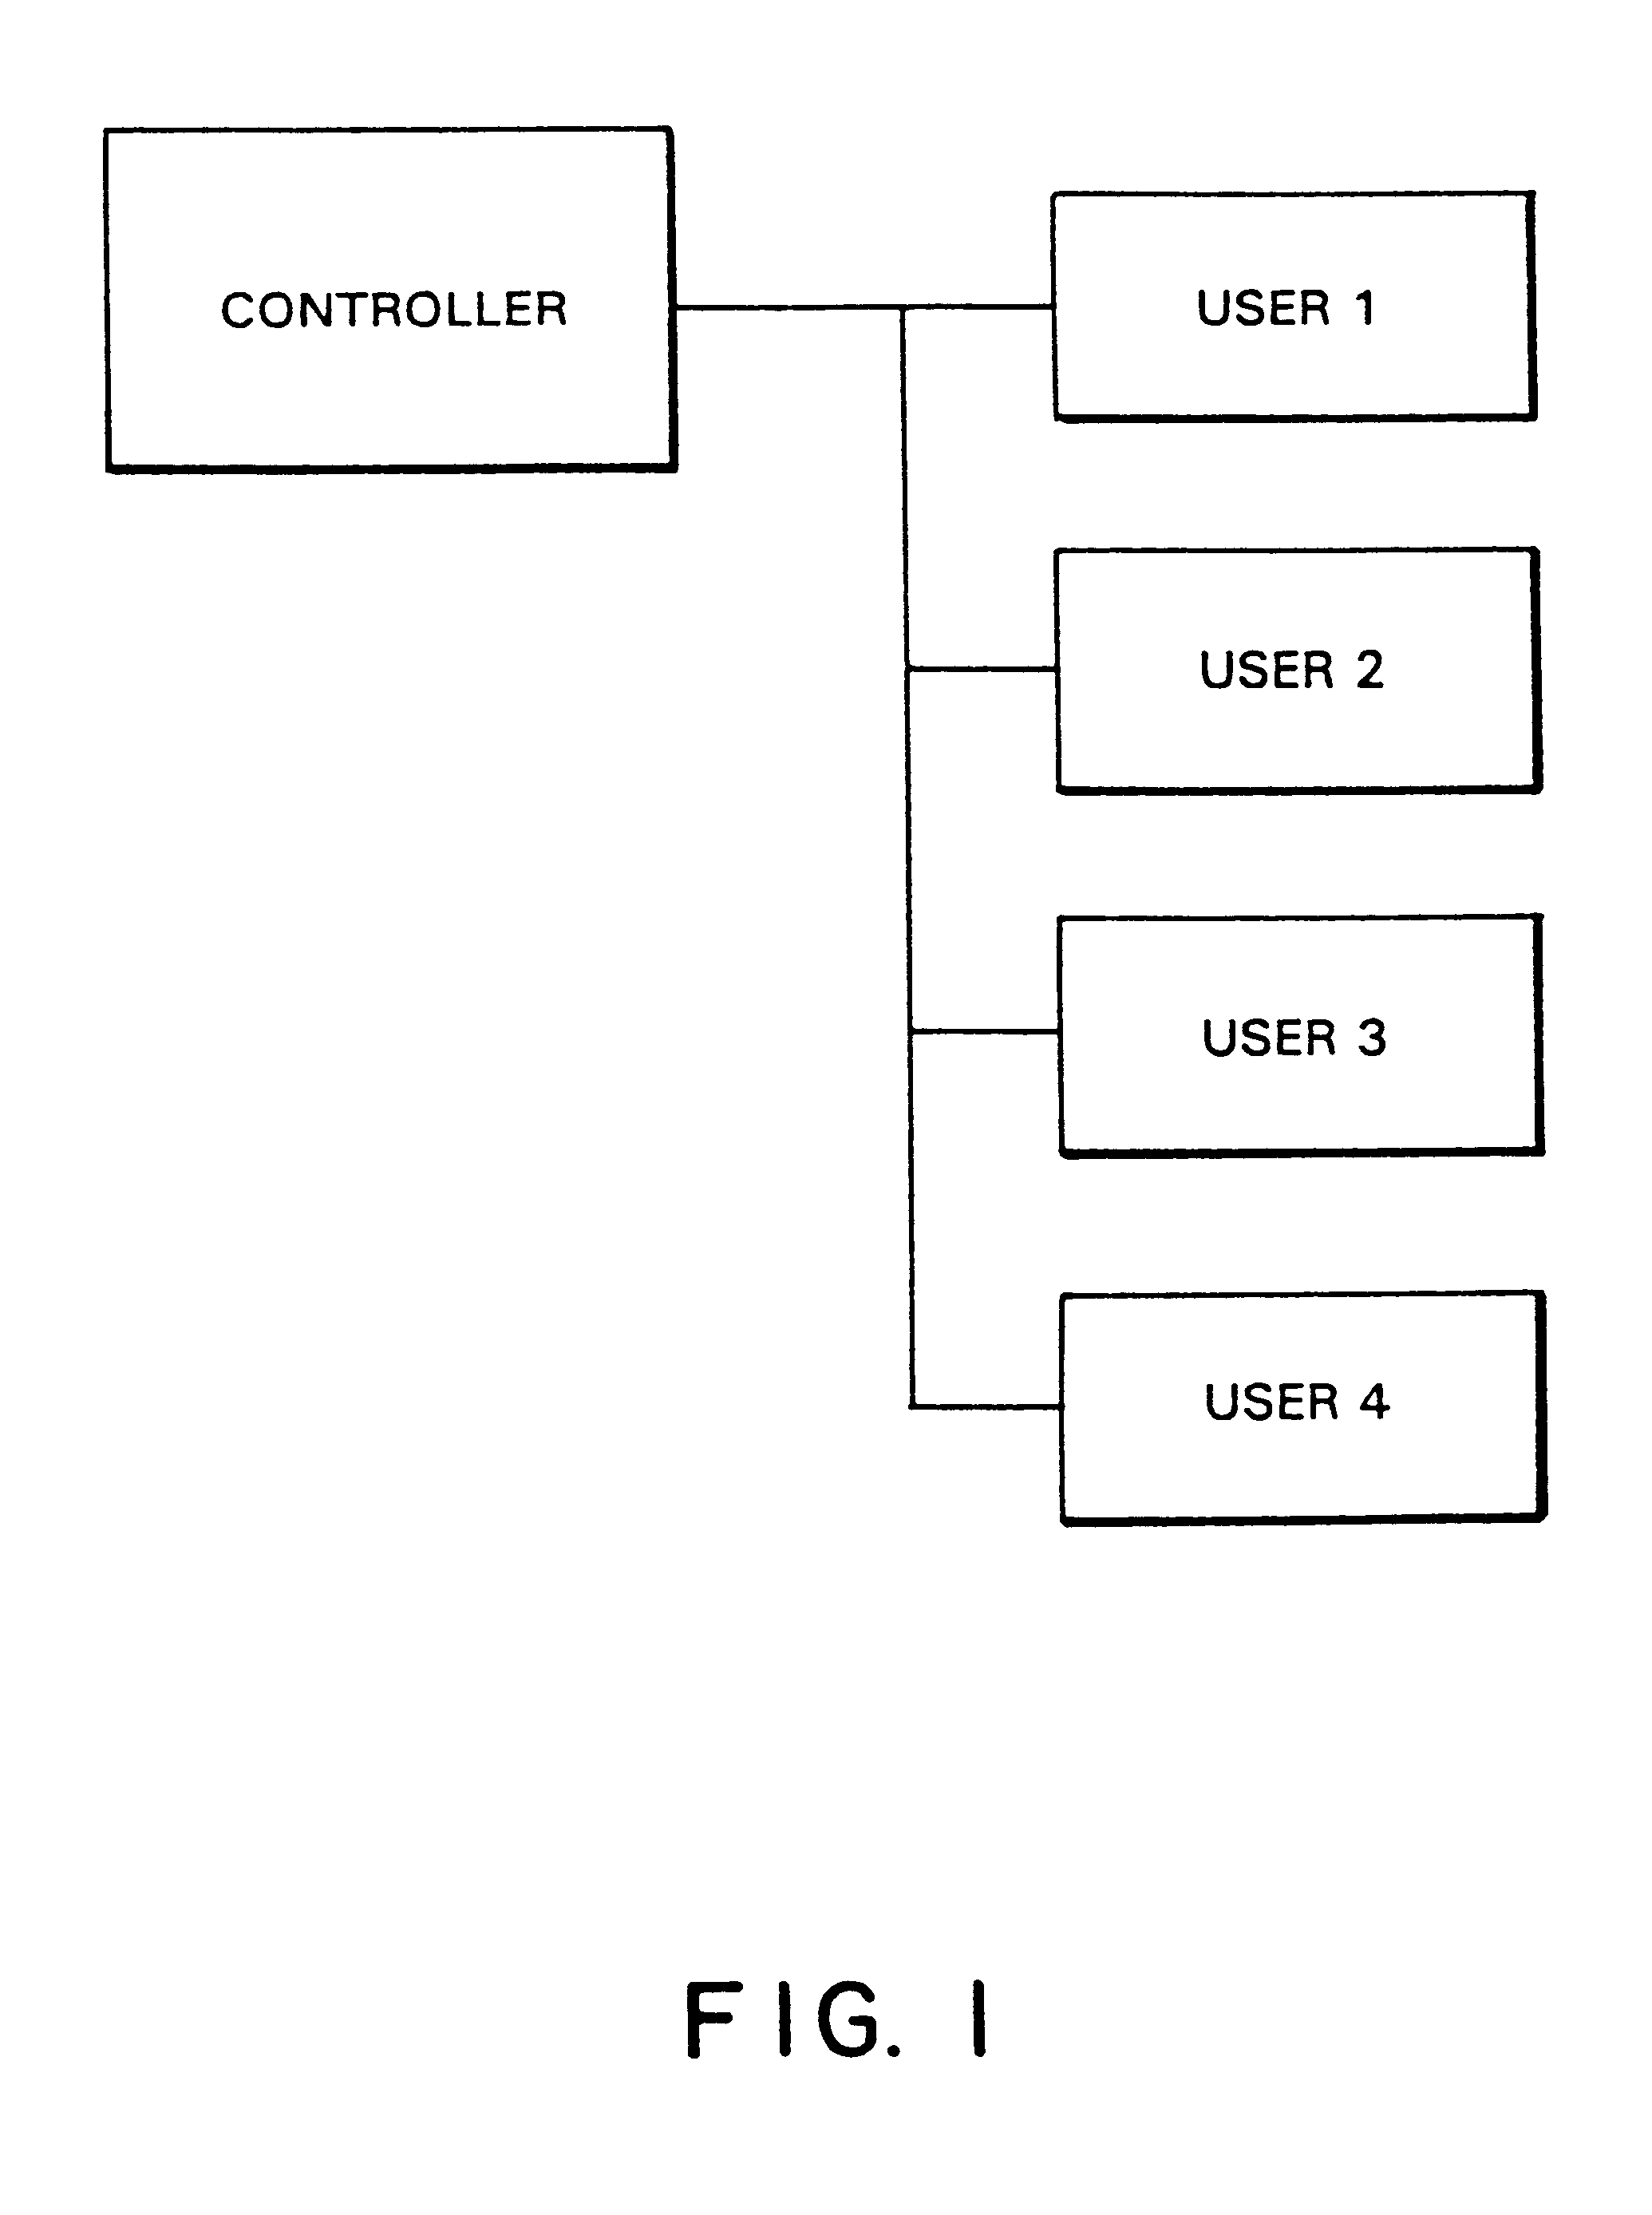 Method and apparatus for controlling communication channels using contention and polling schemes